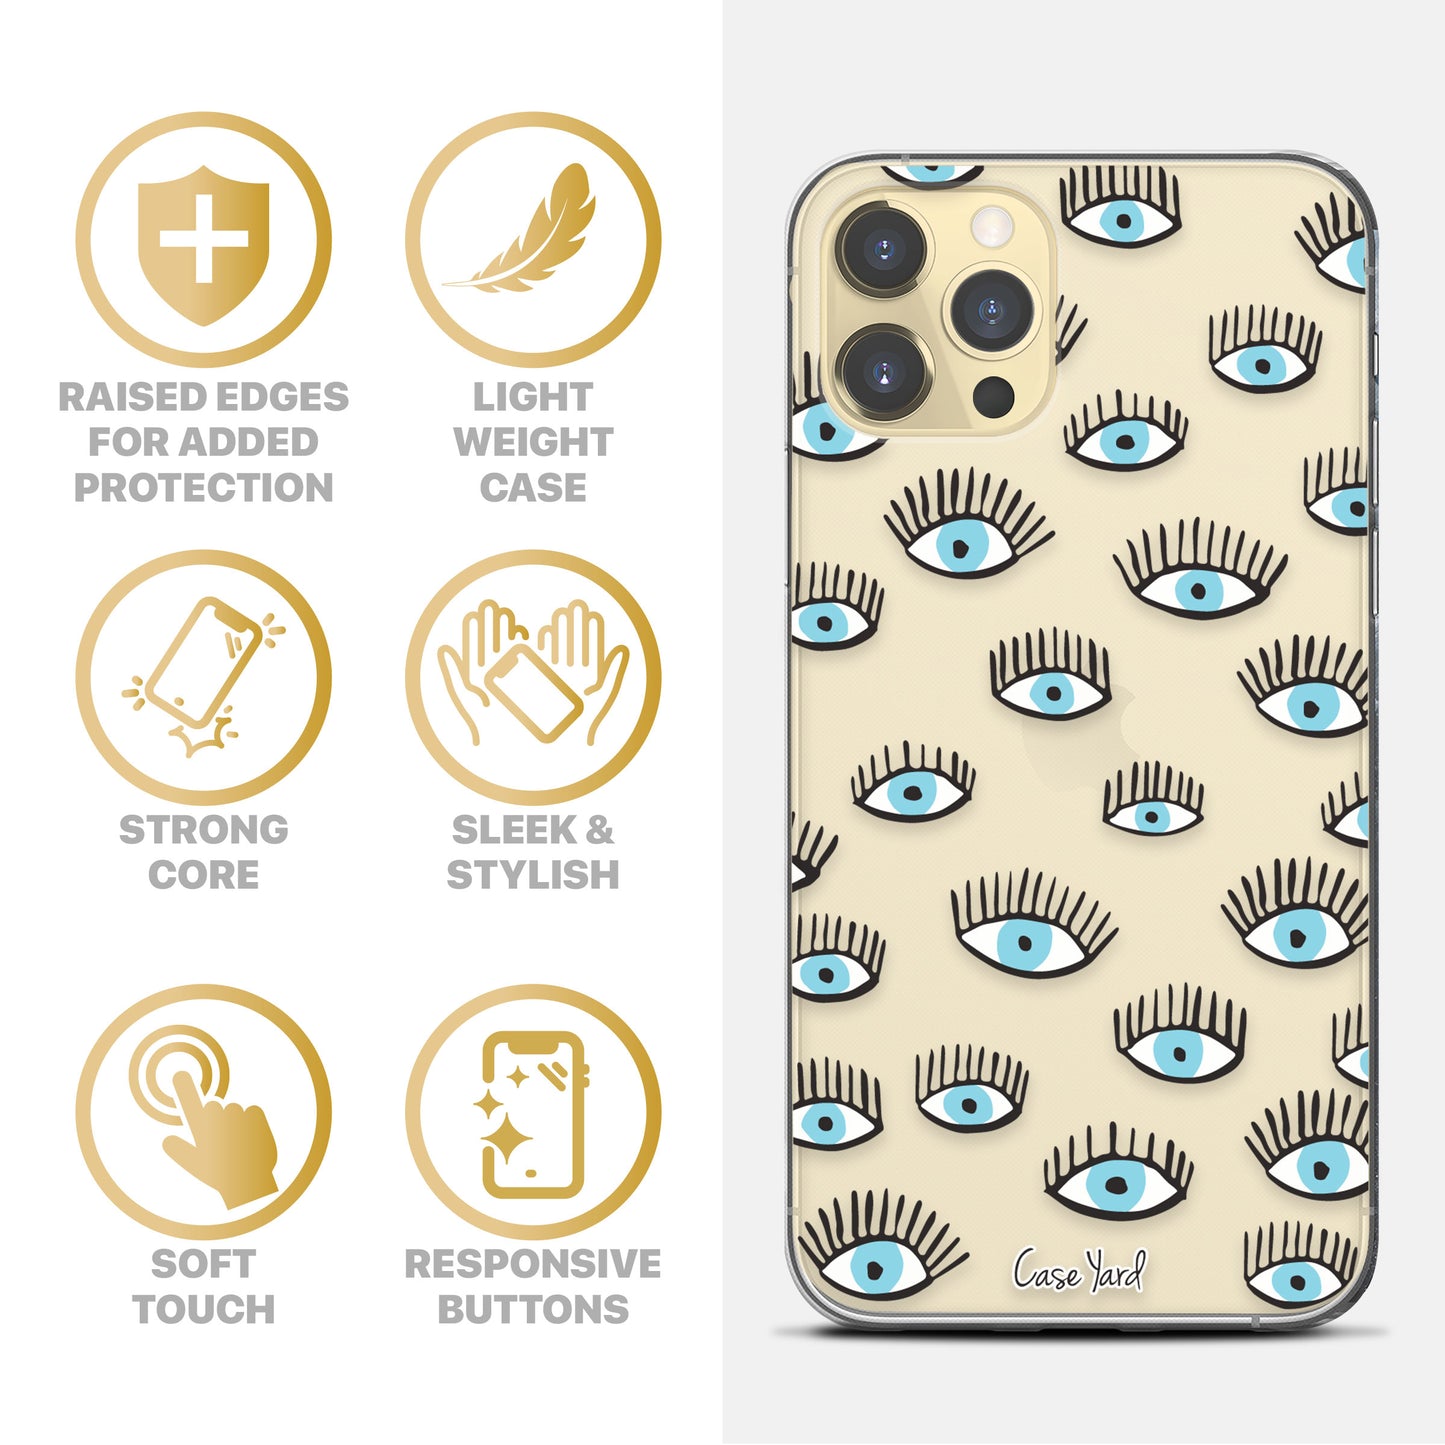 TPU Clear case with (All Seeing Eyes) Design for iPhone & Samsung Phones